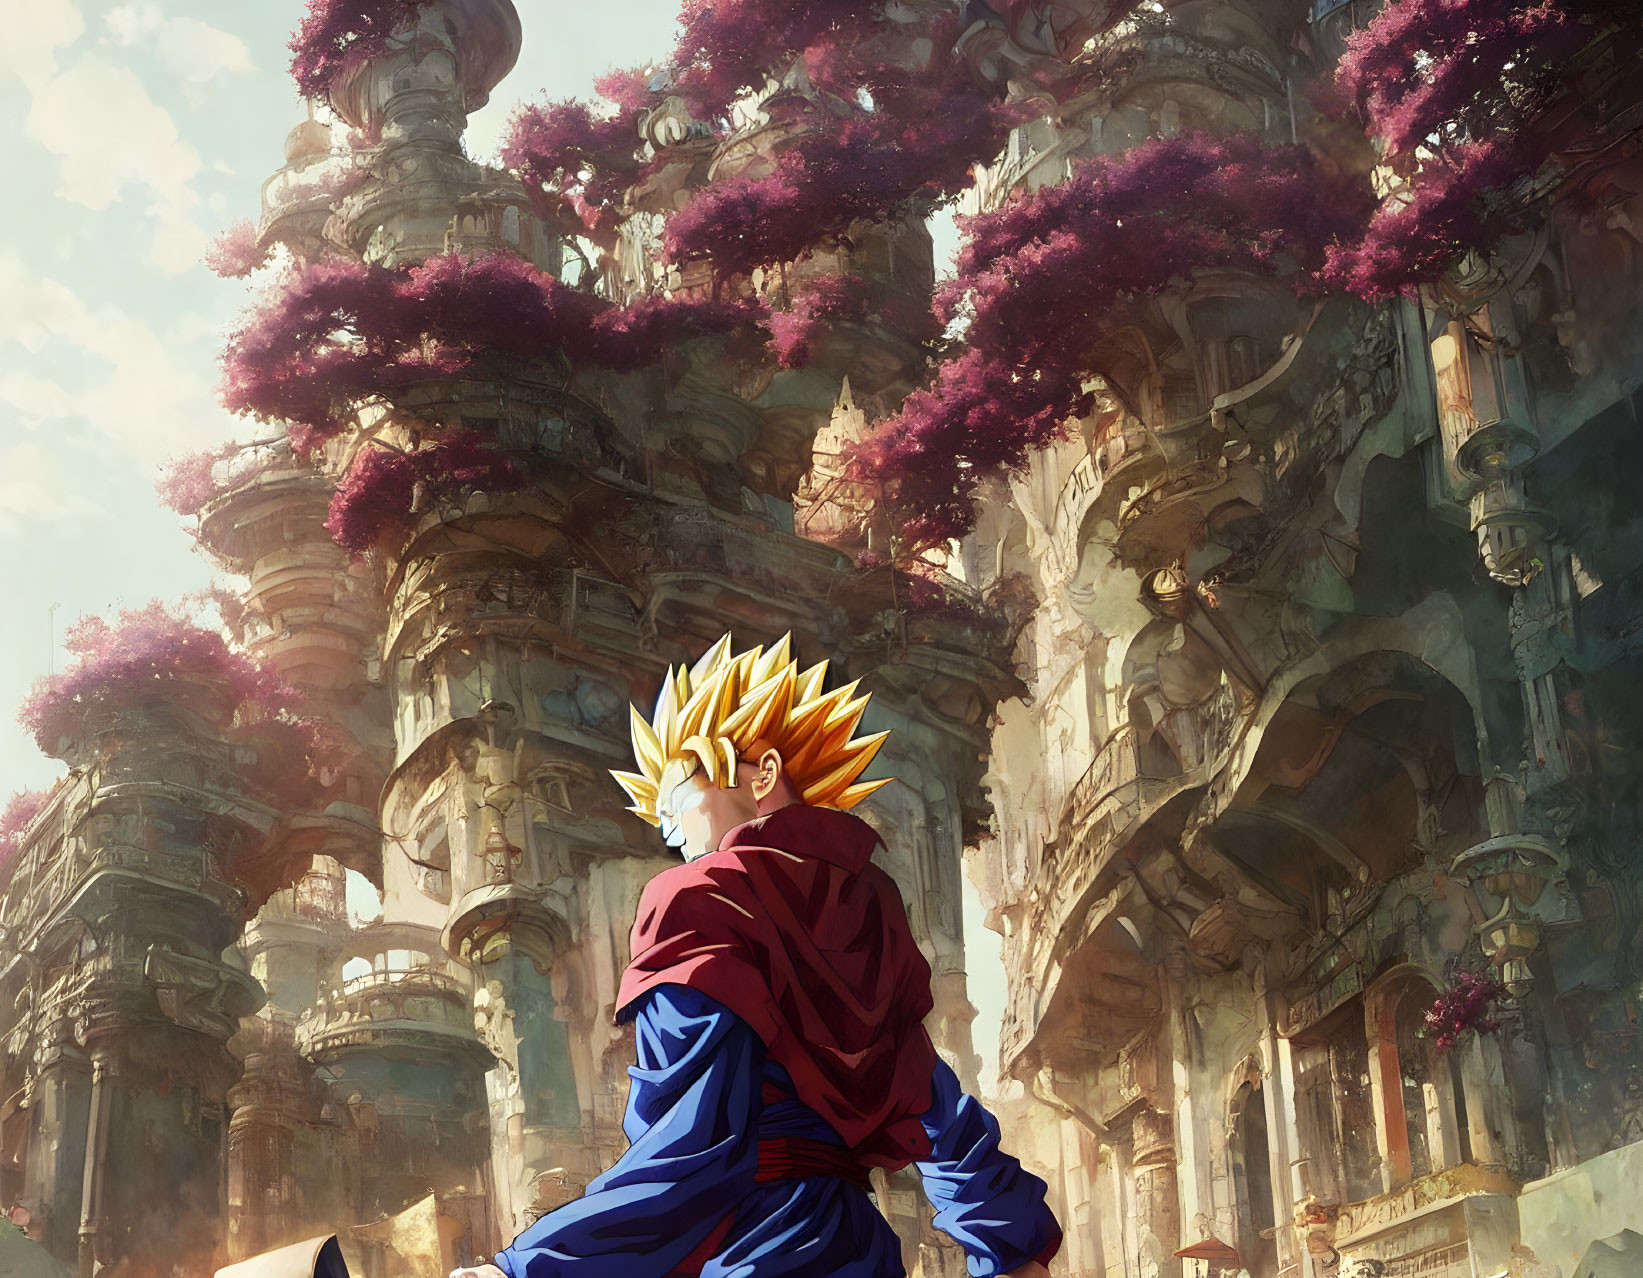 Spiky Blond-Haired Anime Character in Red Cape at Ancient Ruins